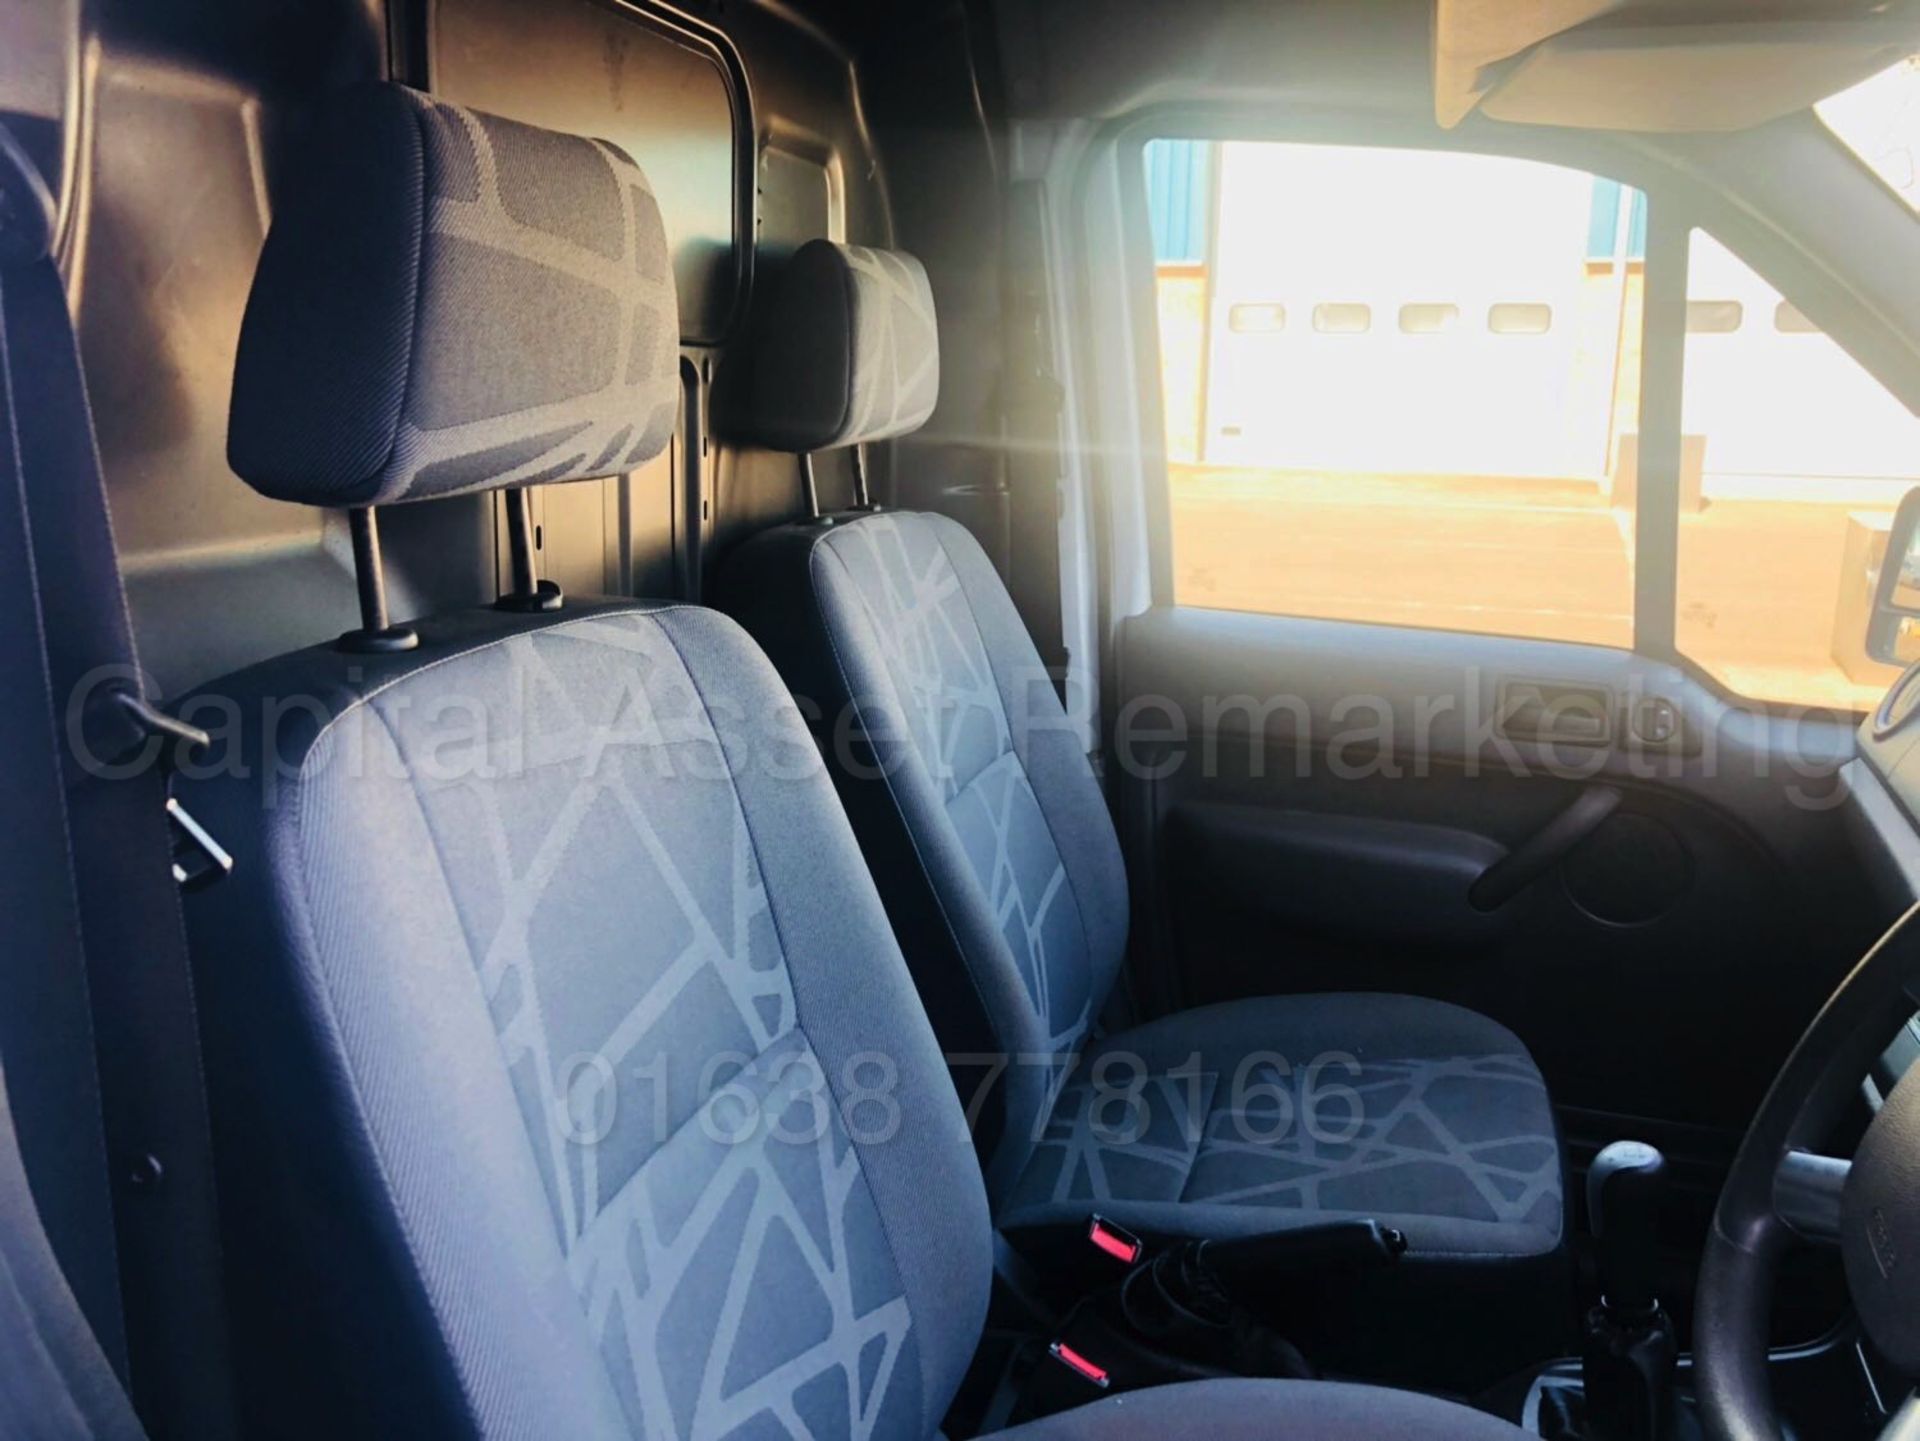 FORD TRANSIT CONNECT *TREND EDITION* 'LWB HI-ROOF' (2013) '1.8 TDCI - 90 BHP - 5 SPEED' *LOW MILES* - Image 12 of 26